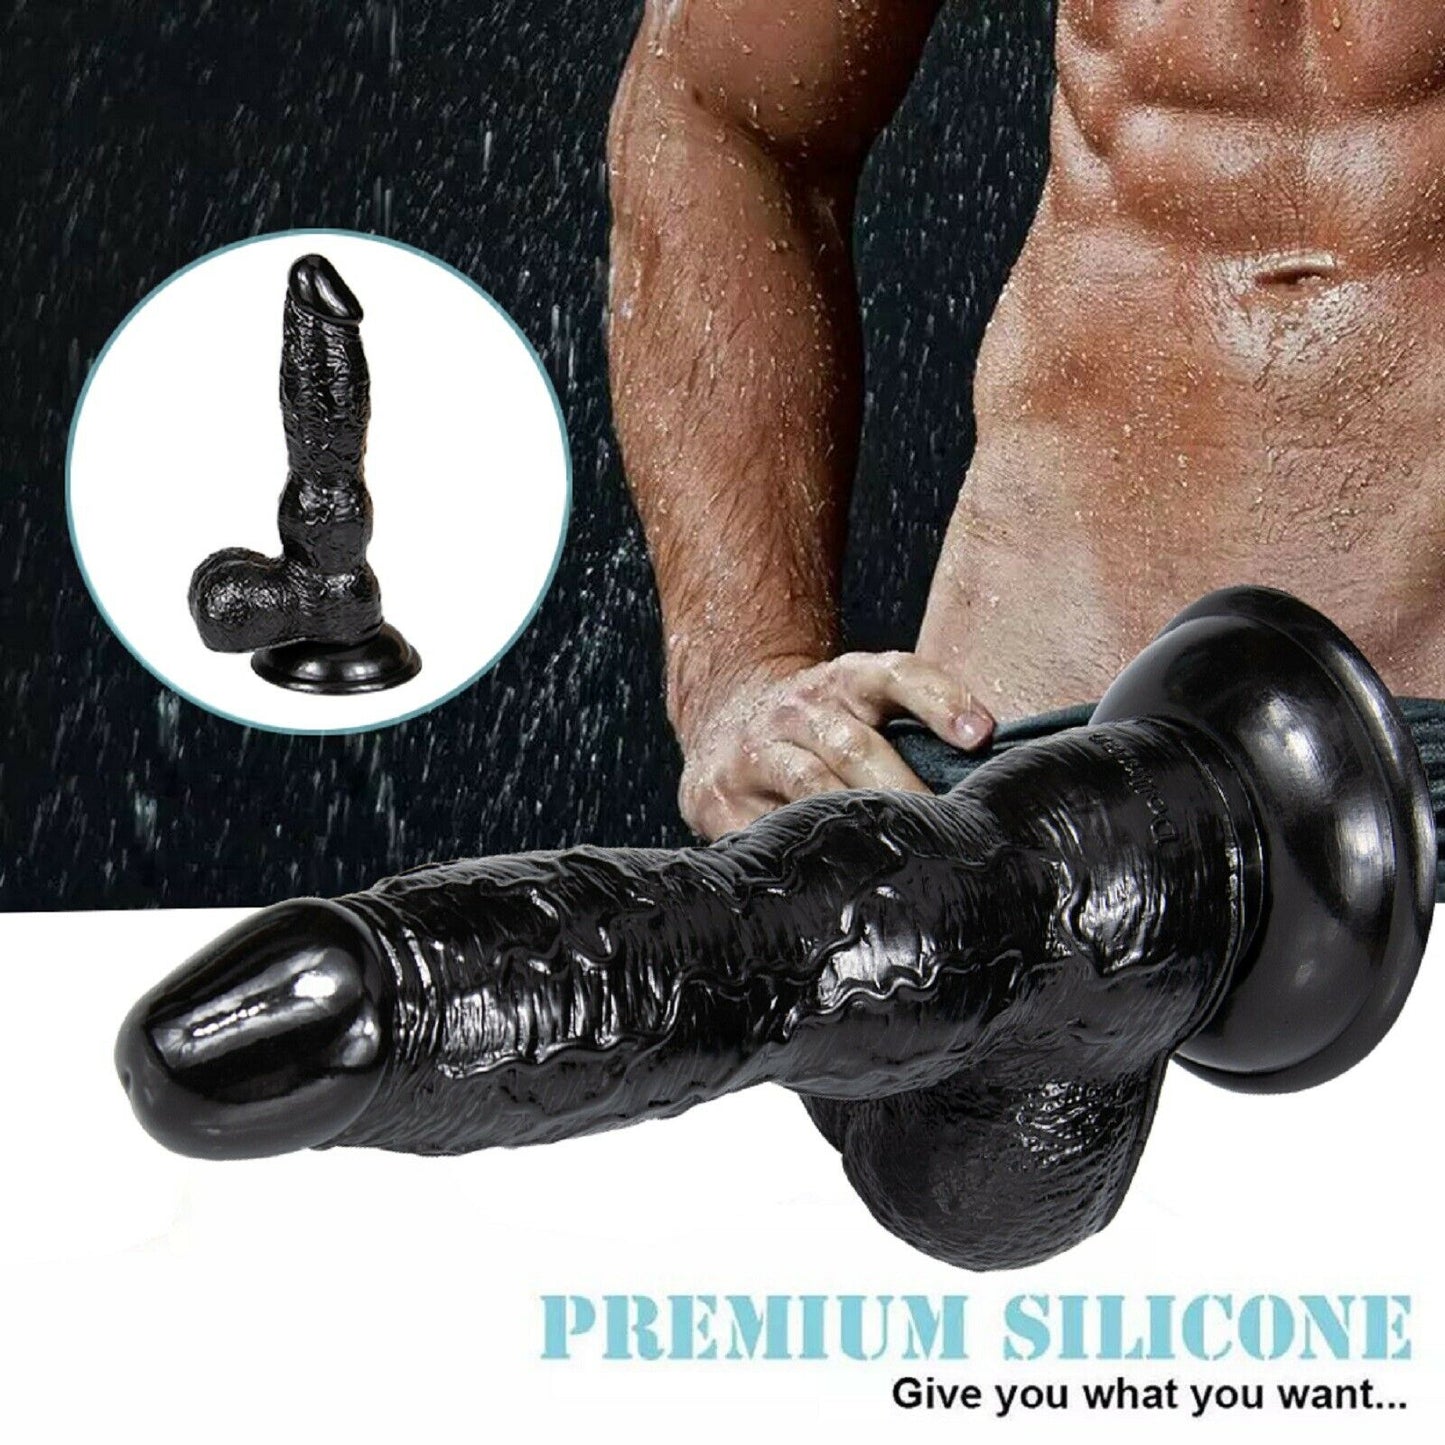 8.2" Realistic Dildo Dong Fantasy Monster FAT MASSIVE Anal BDSM Adult Sex Toy